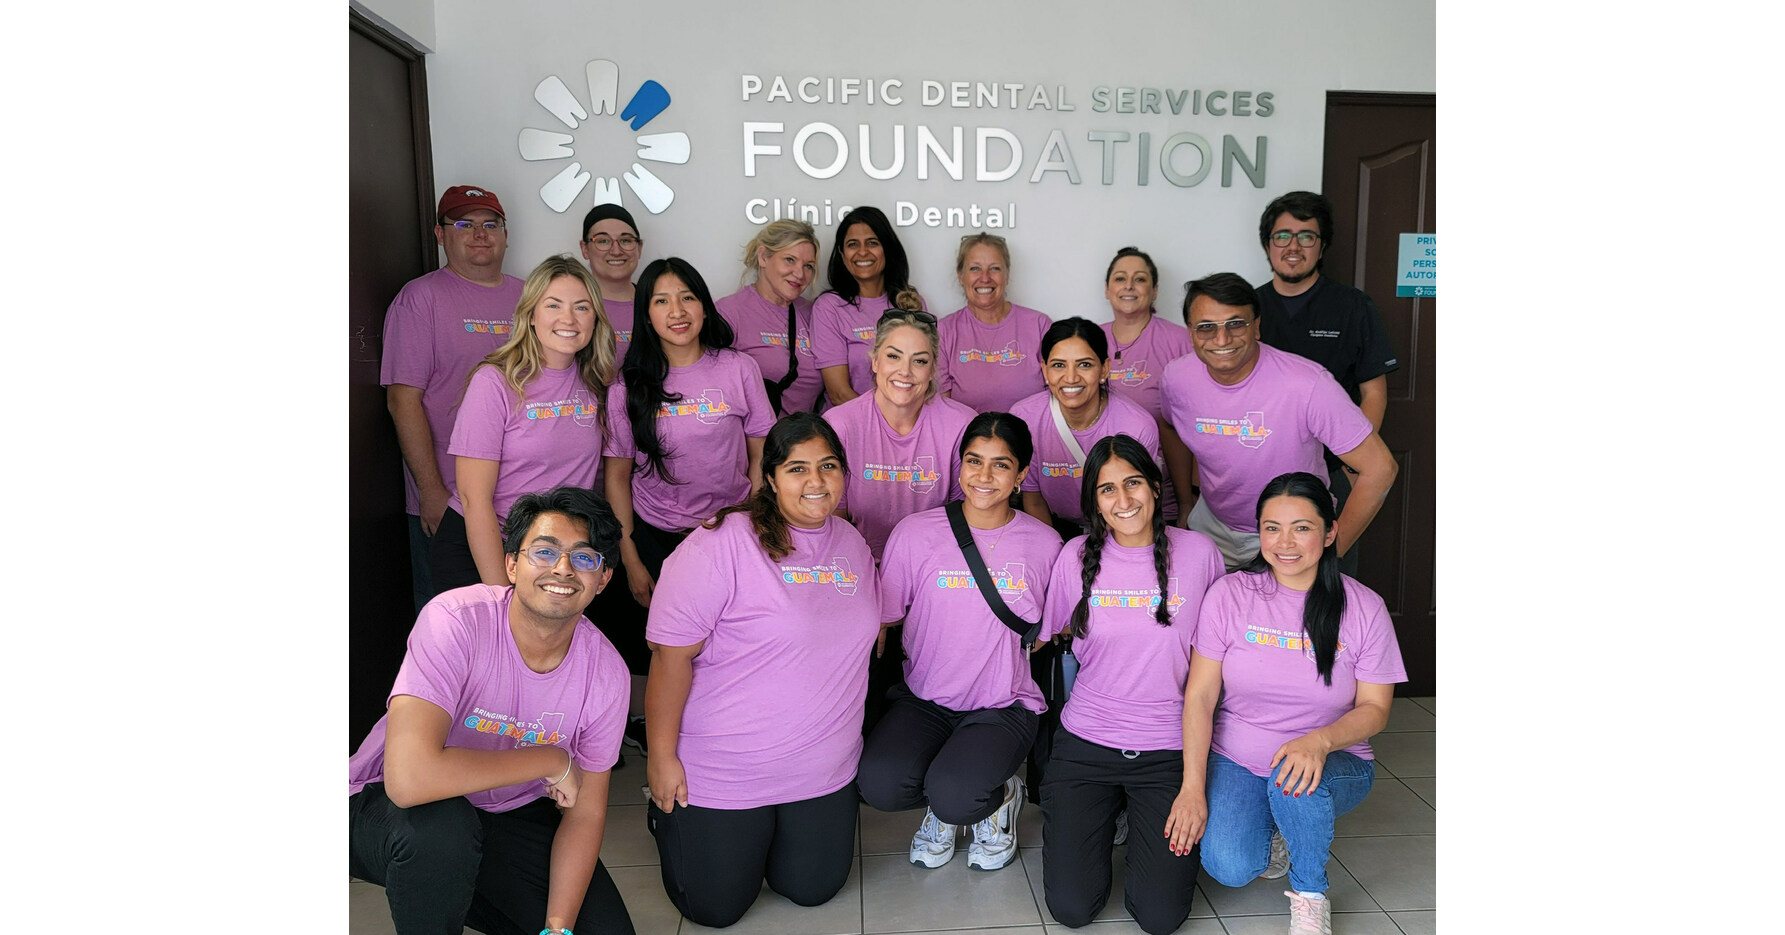 Pacific Dental Services Marks 40th International Service Trip and $11 Million in Donated Dentistry Around The World